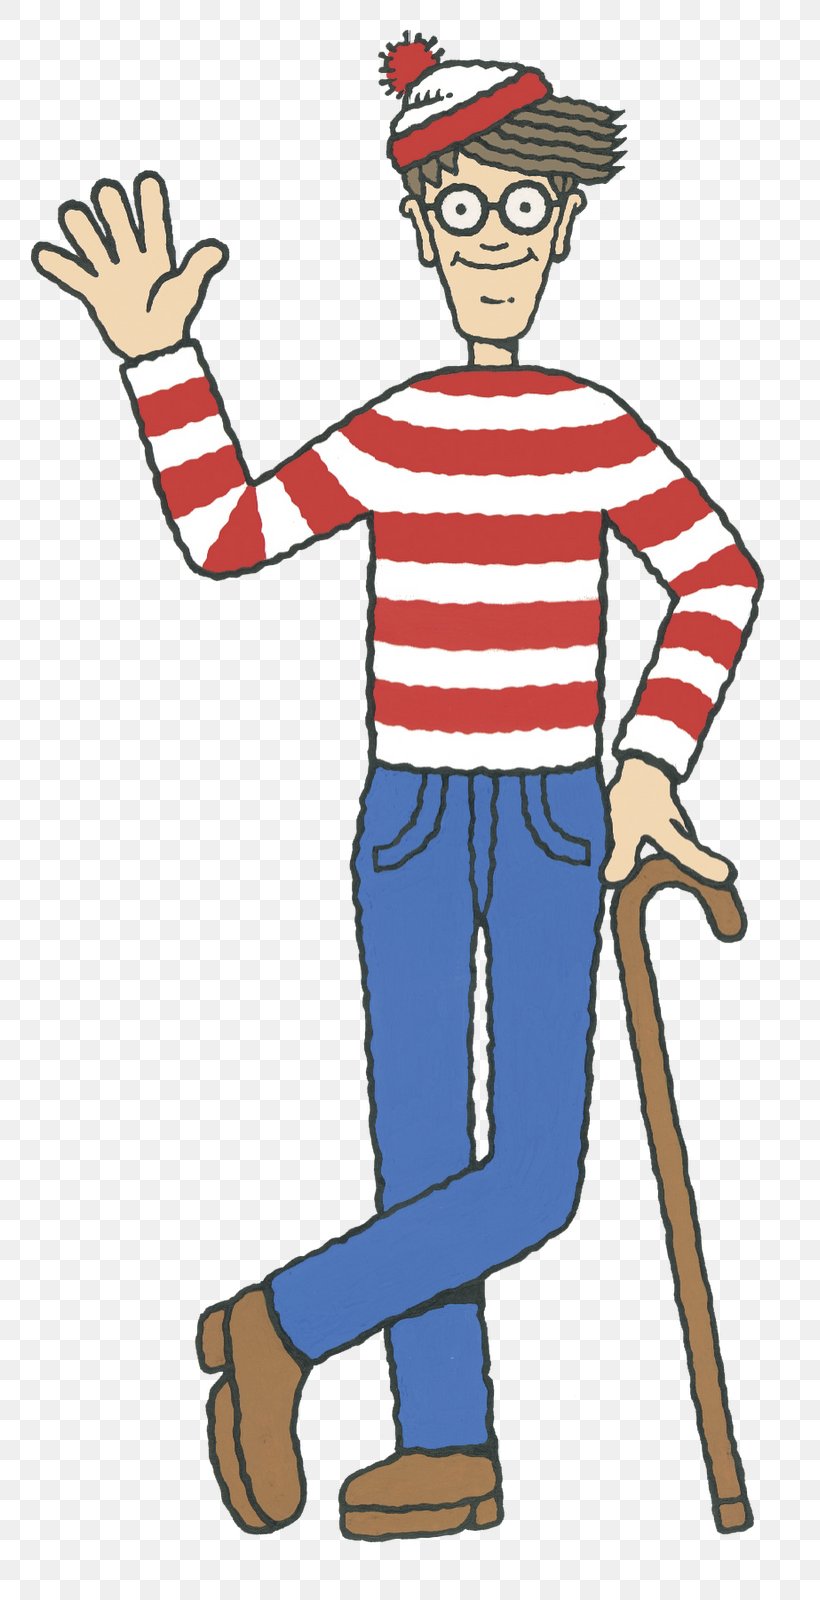 Where's Wally? Book Series Odlaw Children's Literature, PNG, 817x1600px, Book, Arm, Art, Artwork, Book Series Download Free